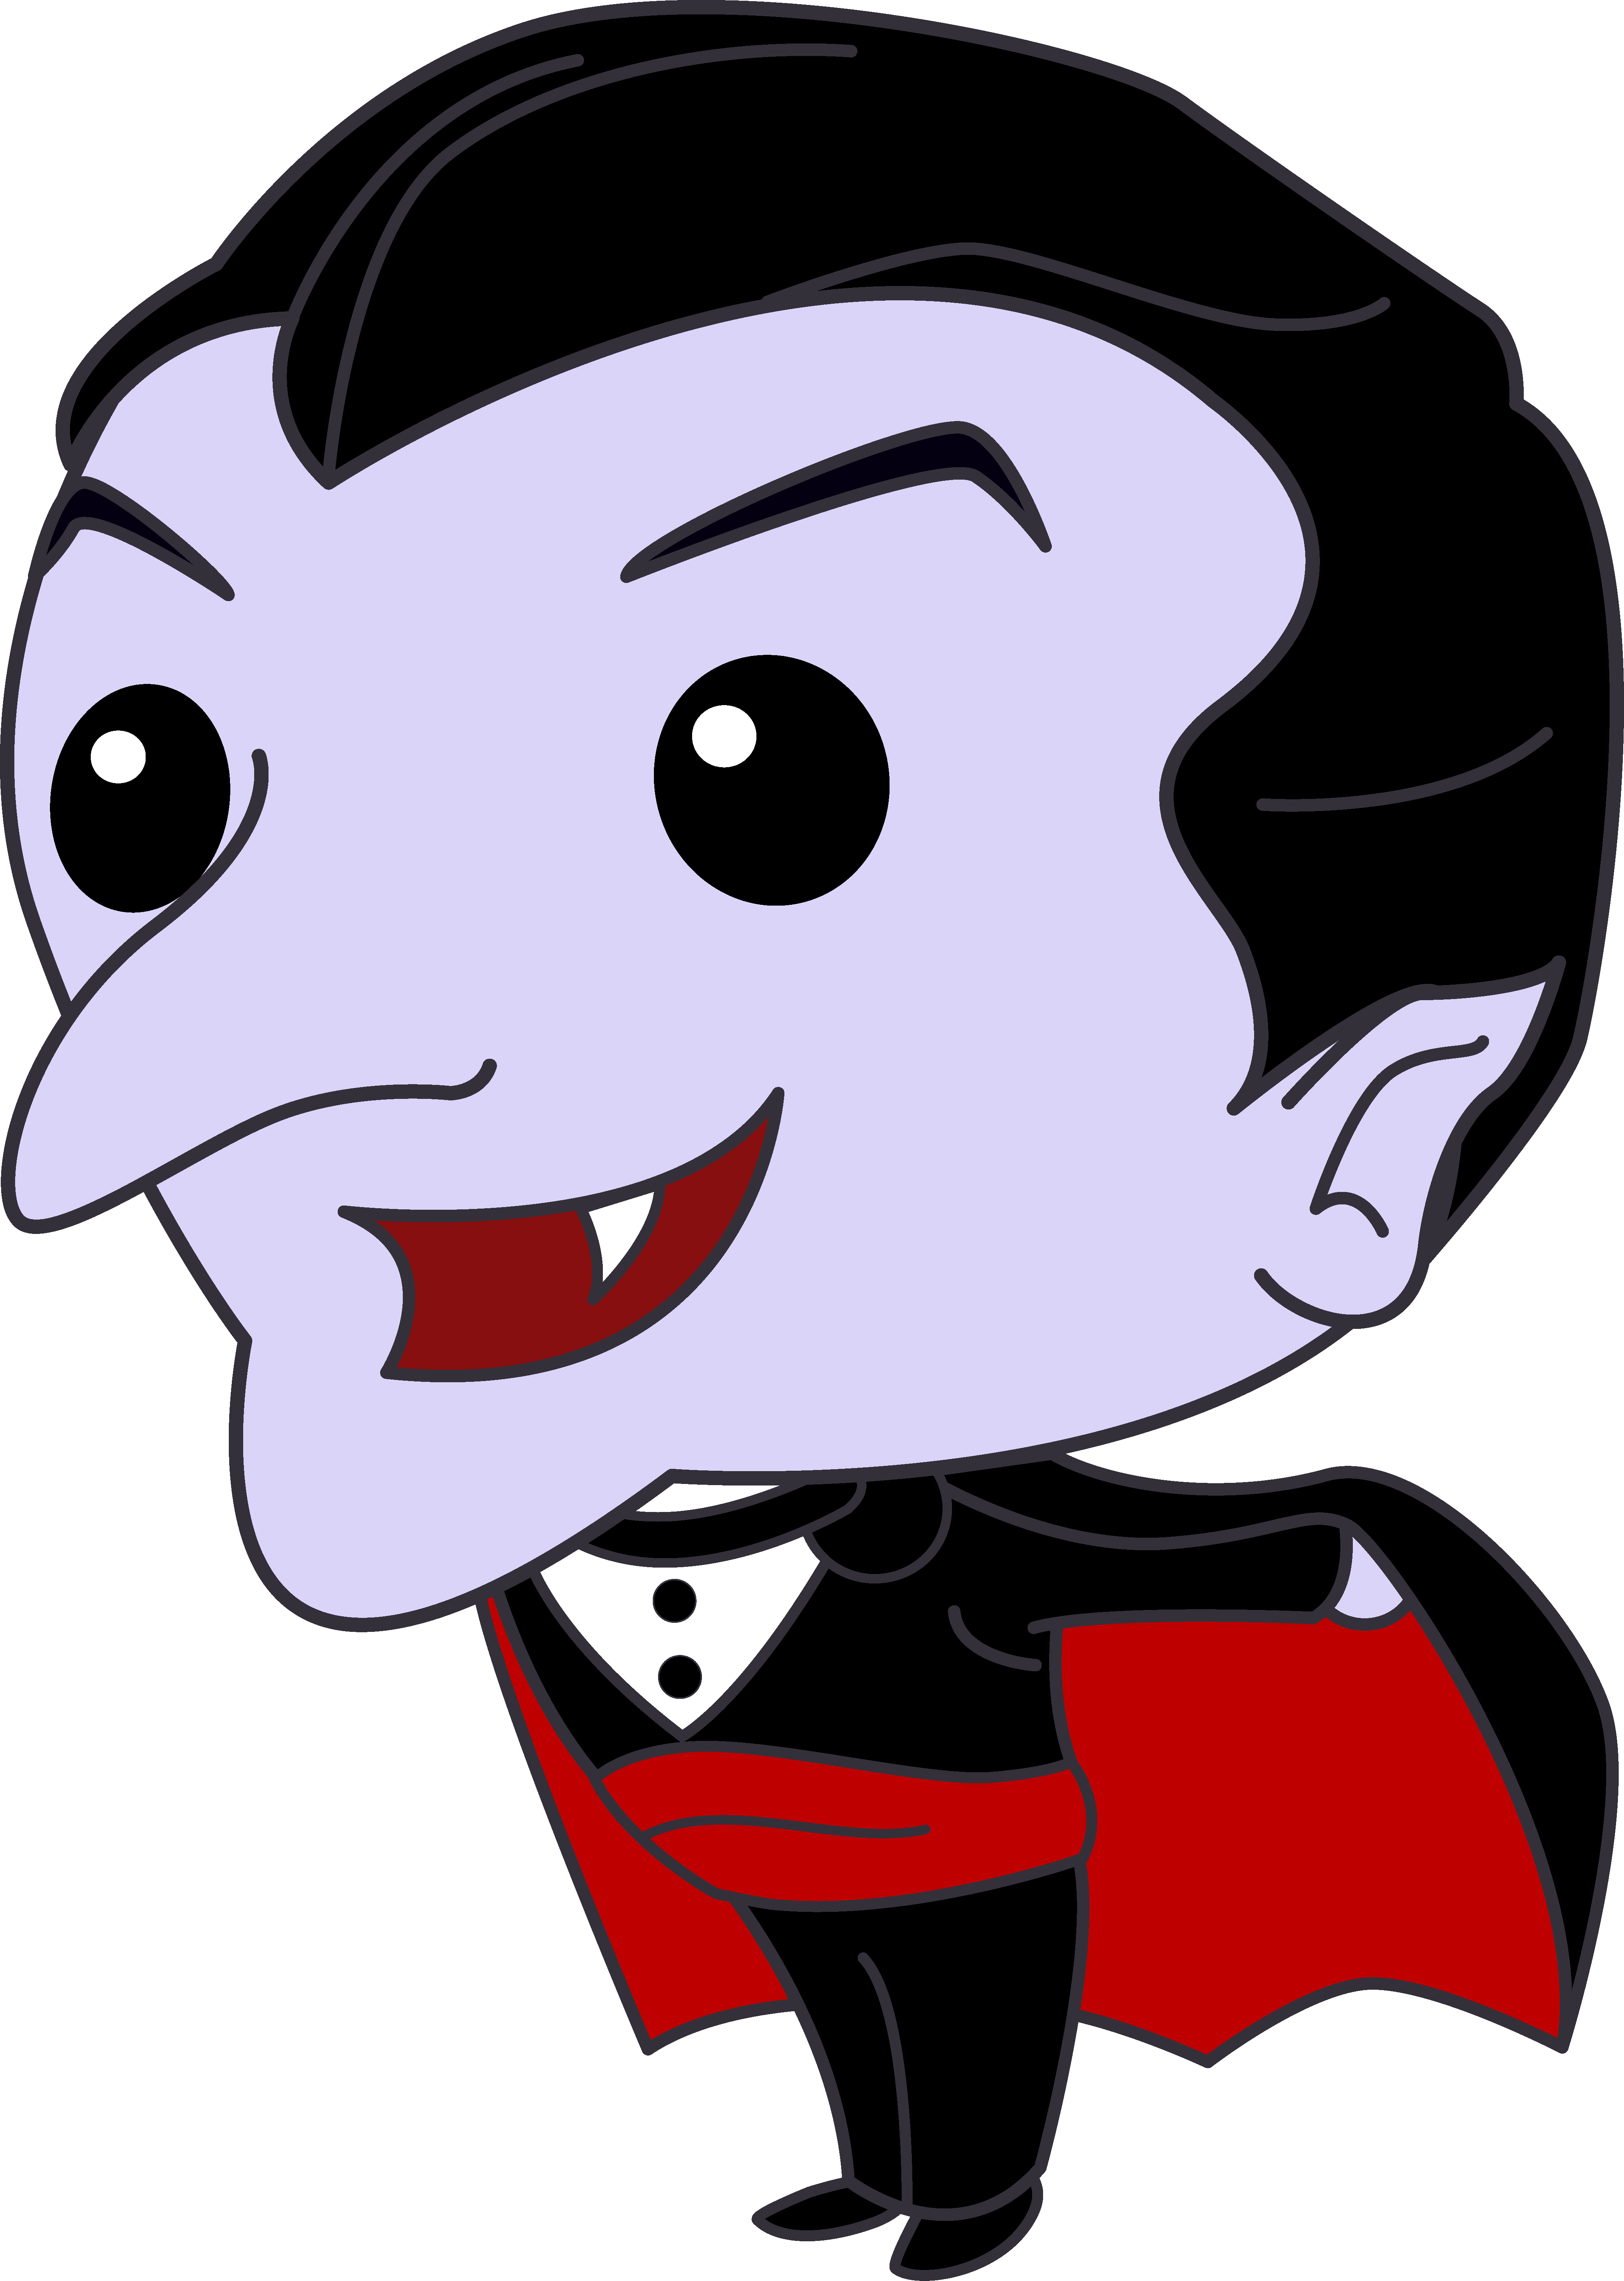 Free Vampire Cartoon Images, Download Free Vampire Cartoon Images png  images, Free ClipArts on Clipart Library